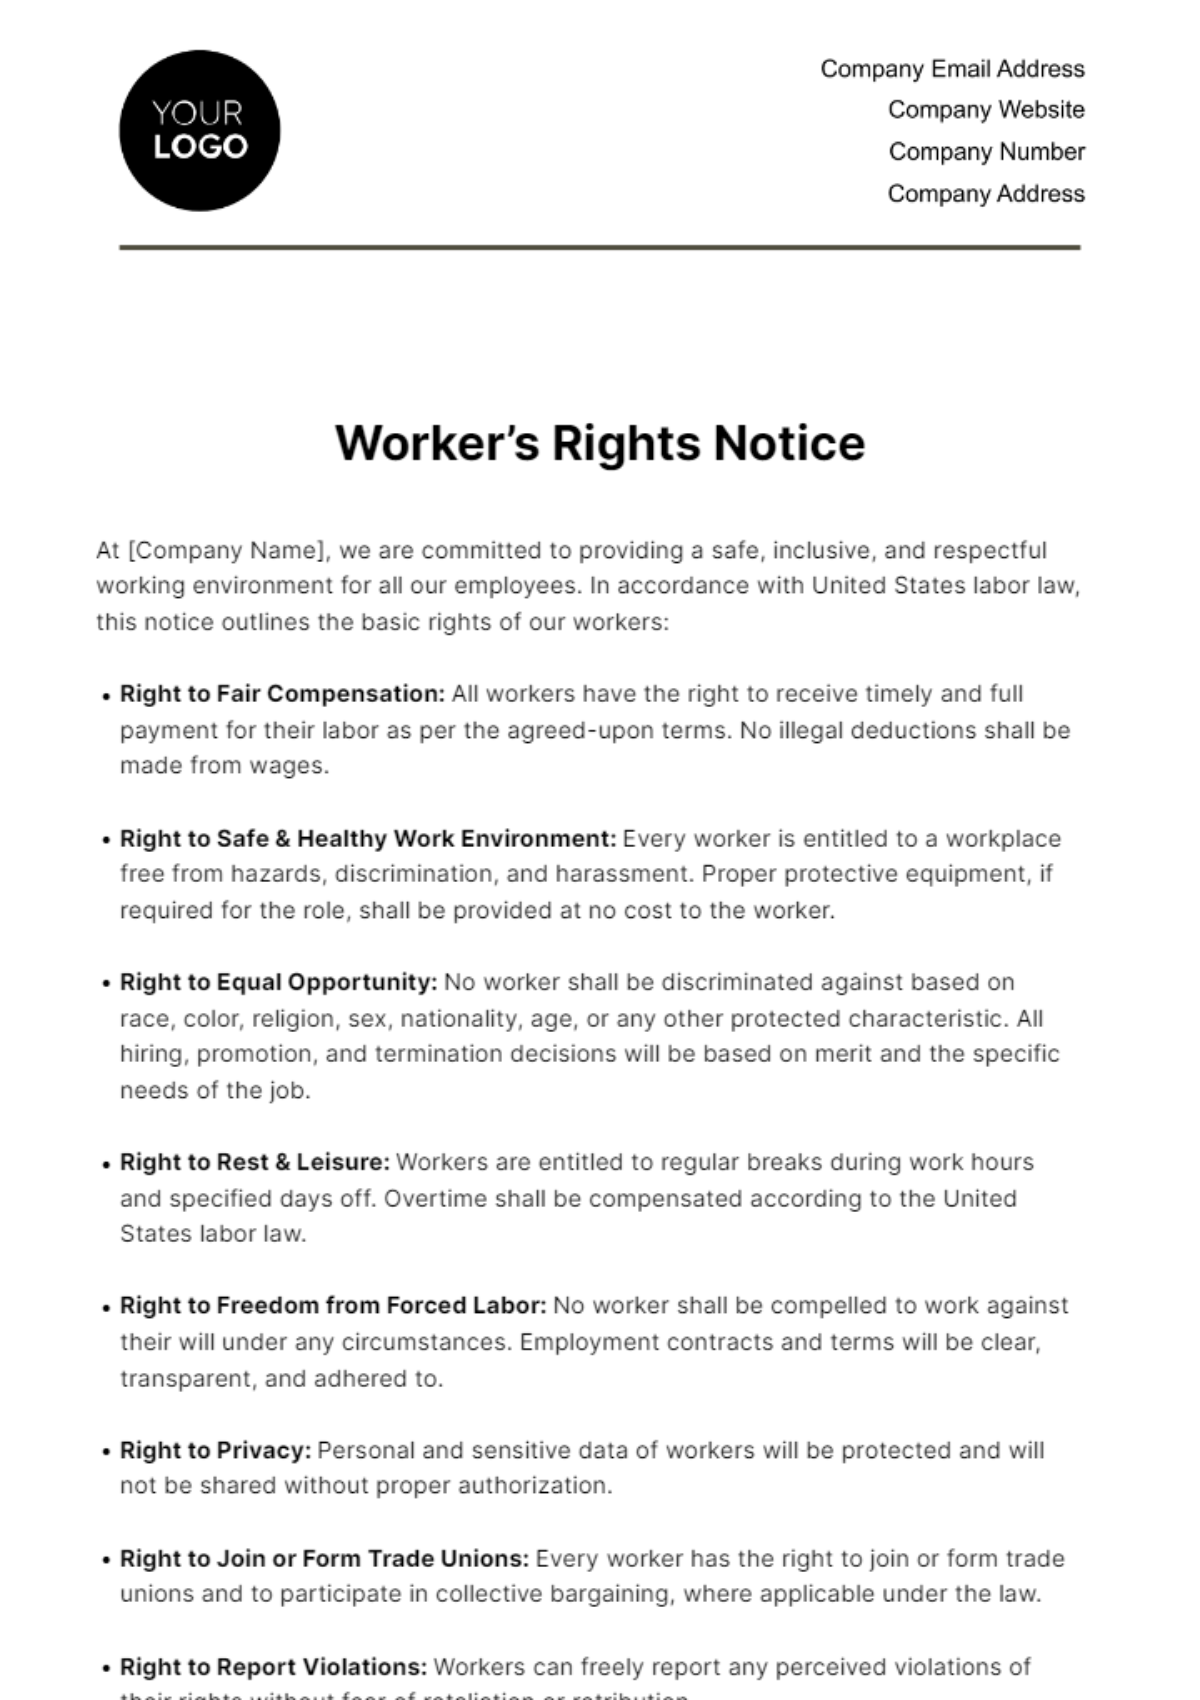 Workers' Rights Notice HR Template